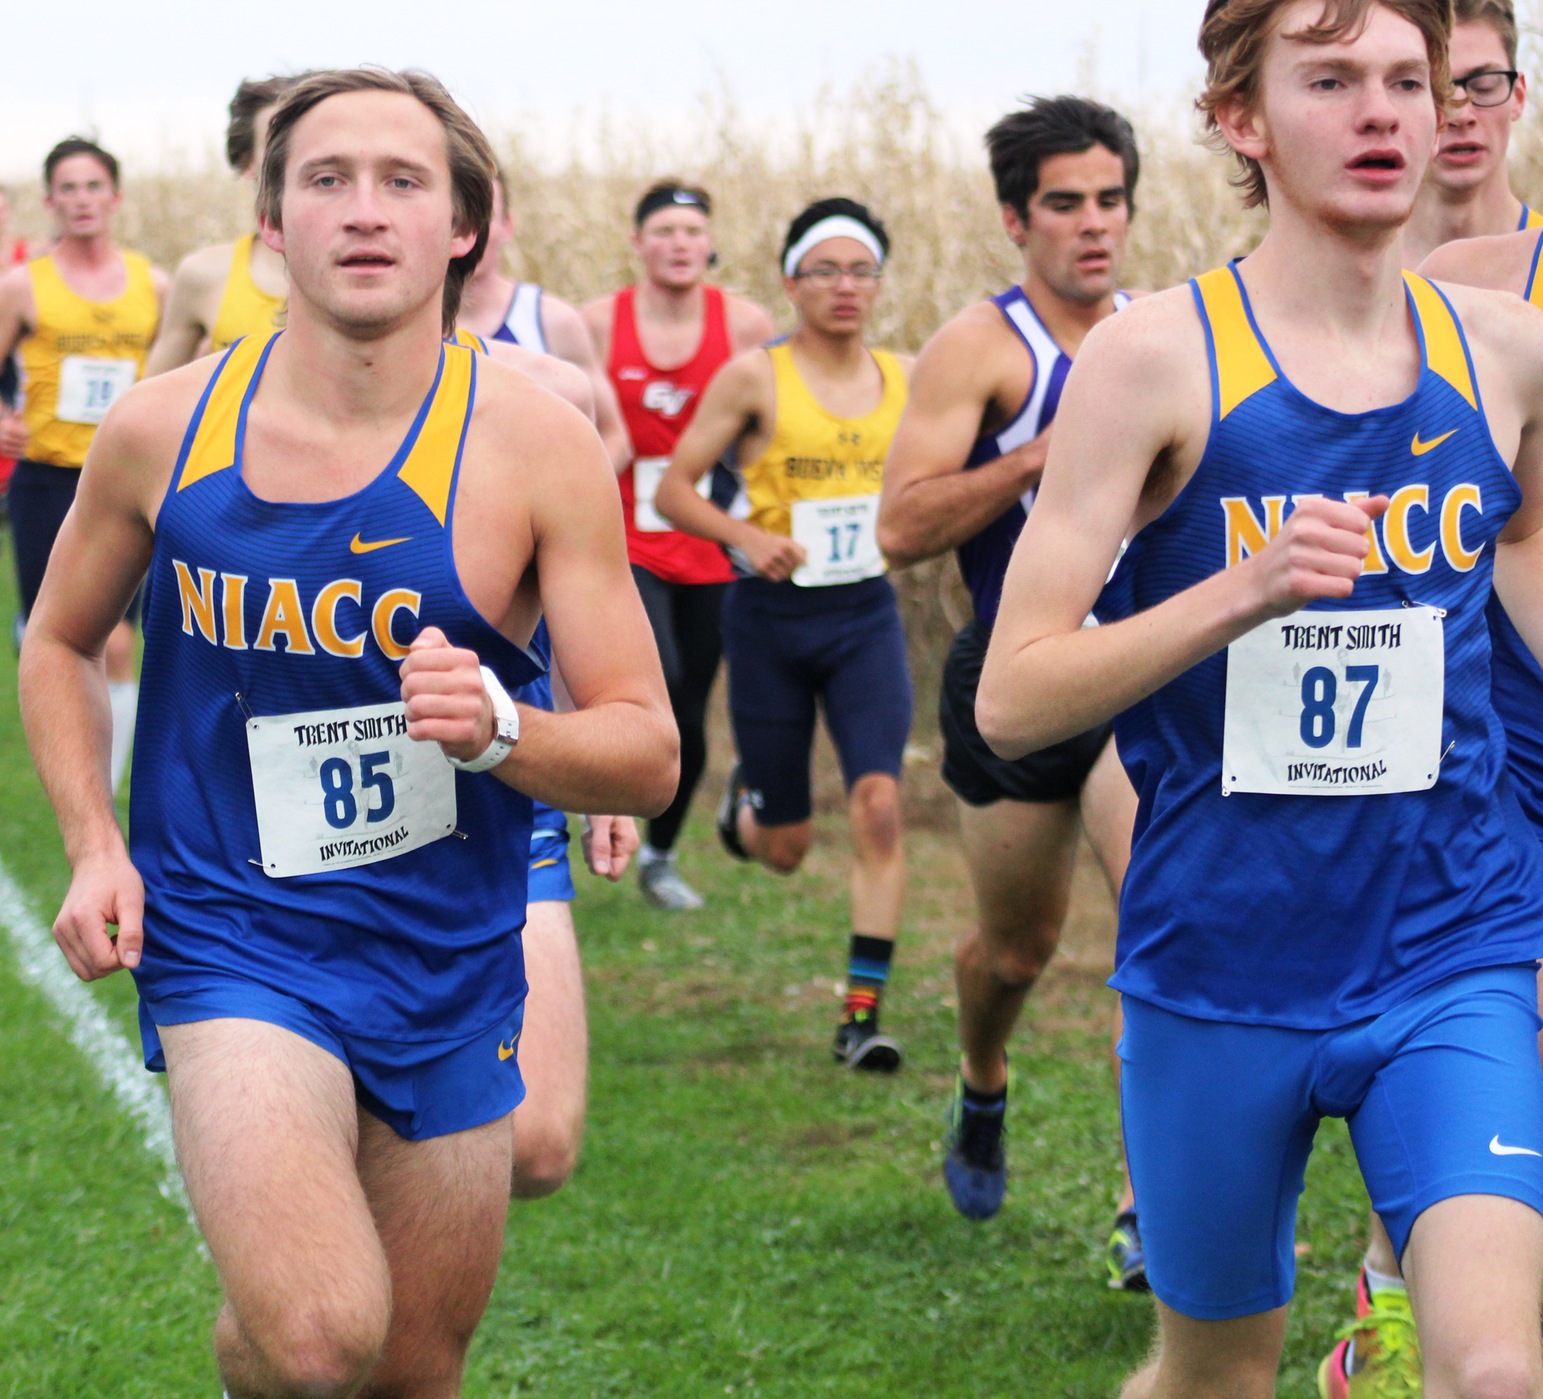 NIACC's Daniel Hennigar (left) and Sam Pedelty compete at the Trent Smith Invitational on Oct. 12 on the NIACC campus.